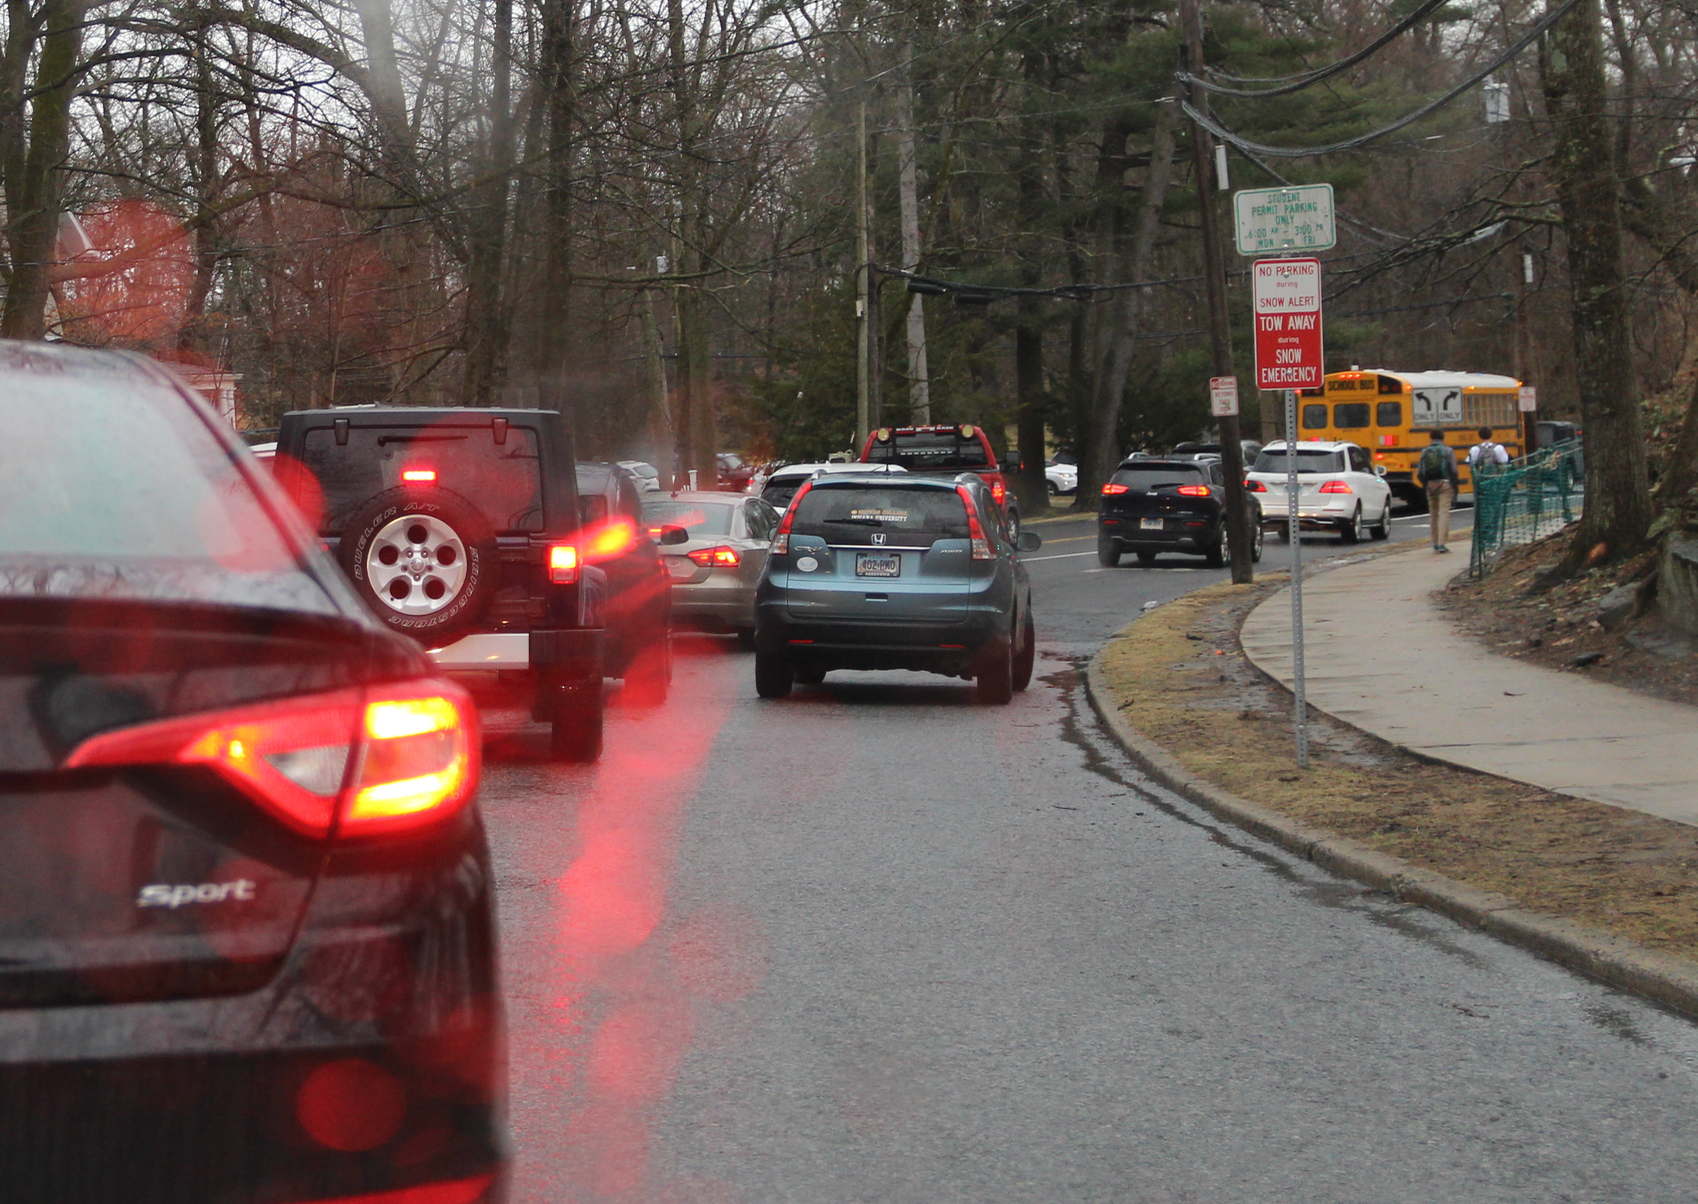 During dismissal, traffic goes around a Honda parked on Hillside near the intersection with Putnam Ave, preventing cars from flowing into the right turn lane. Feb 22, 2018 Photo: Leslie Yager